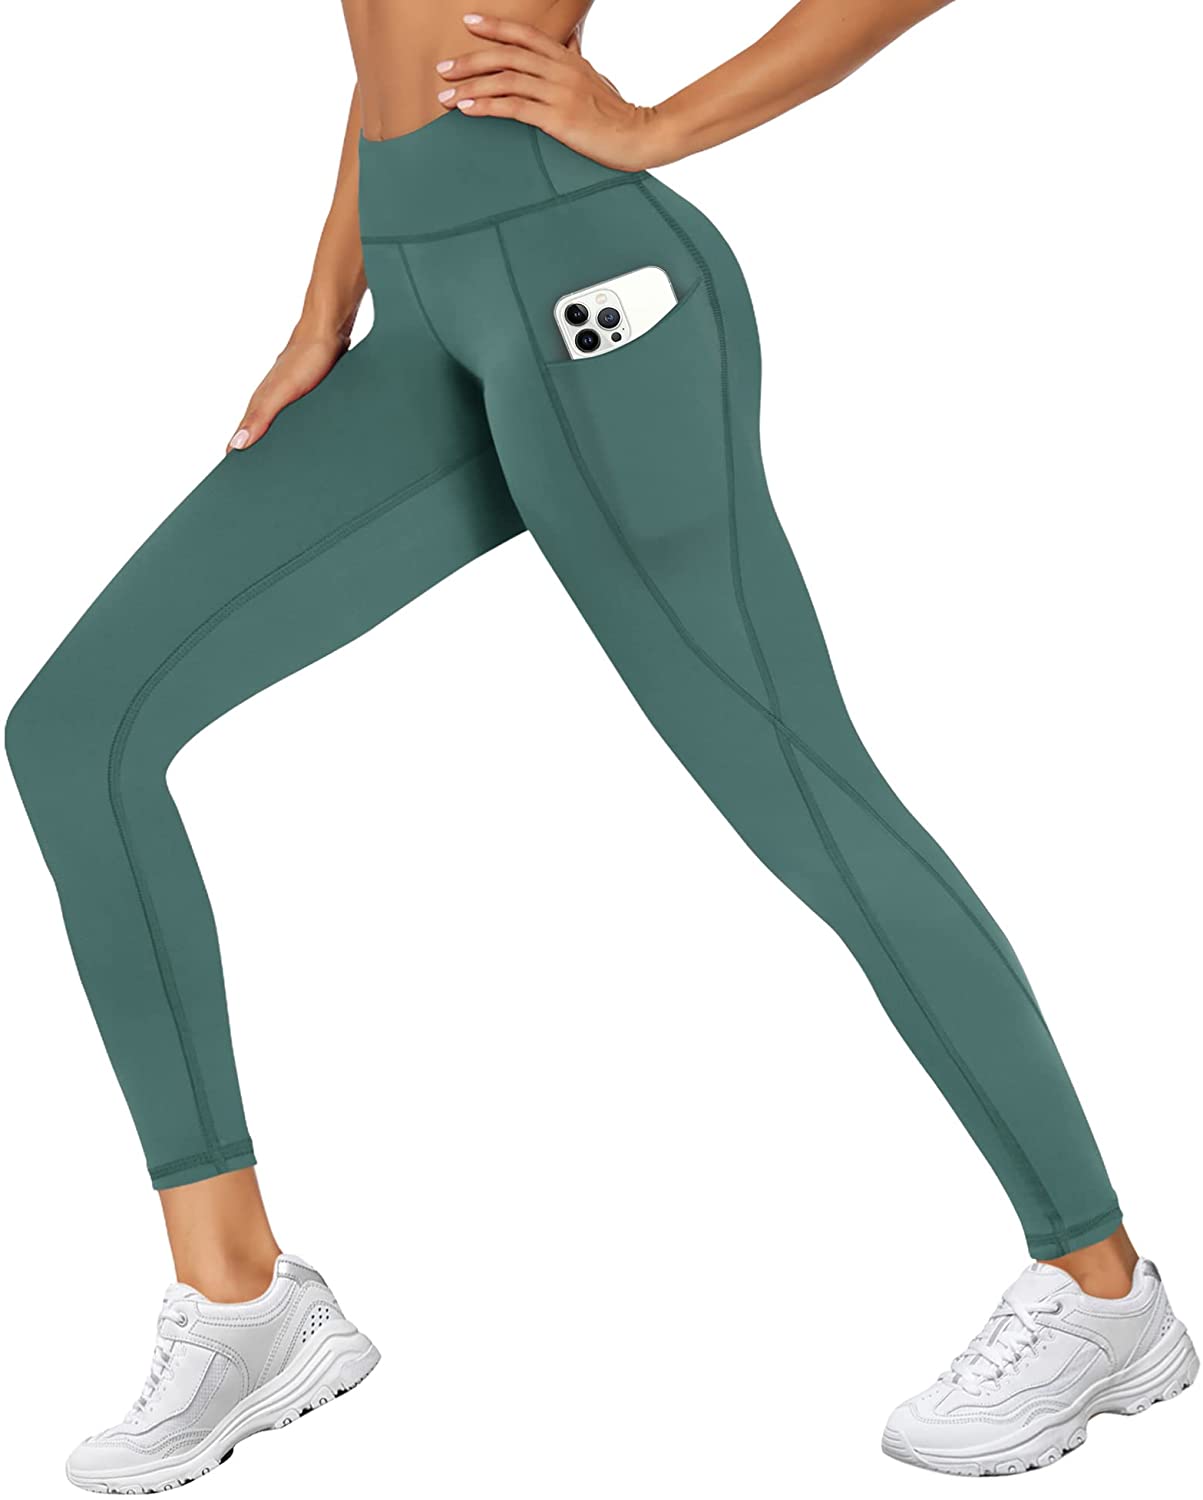 CAMPSNAIL Leggings with Pockets for Women-High Waisted Tummy